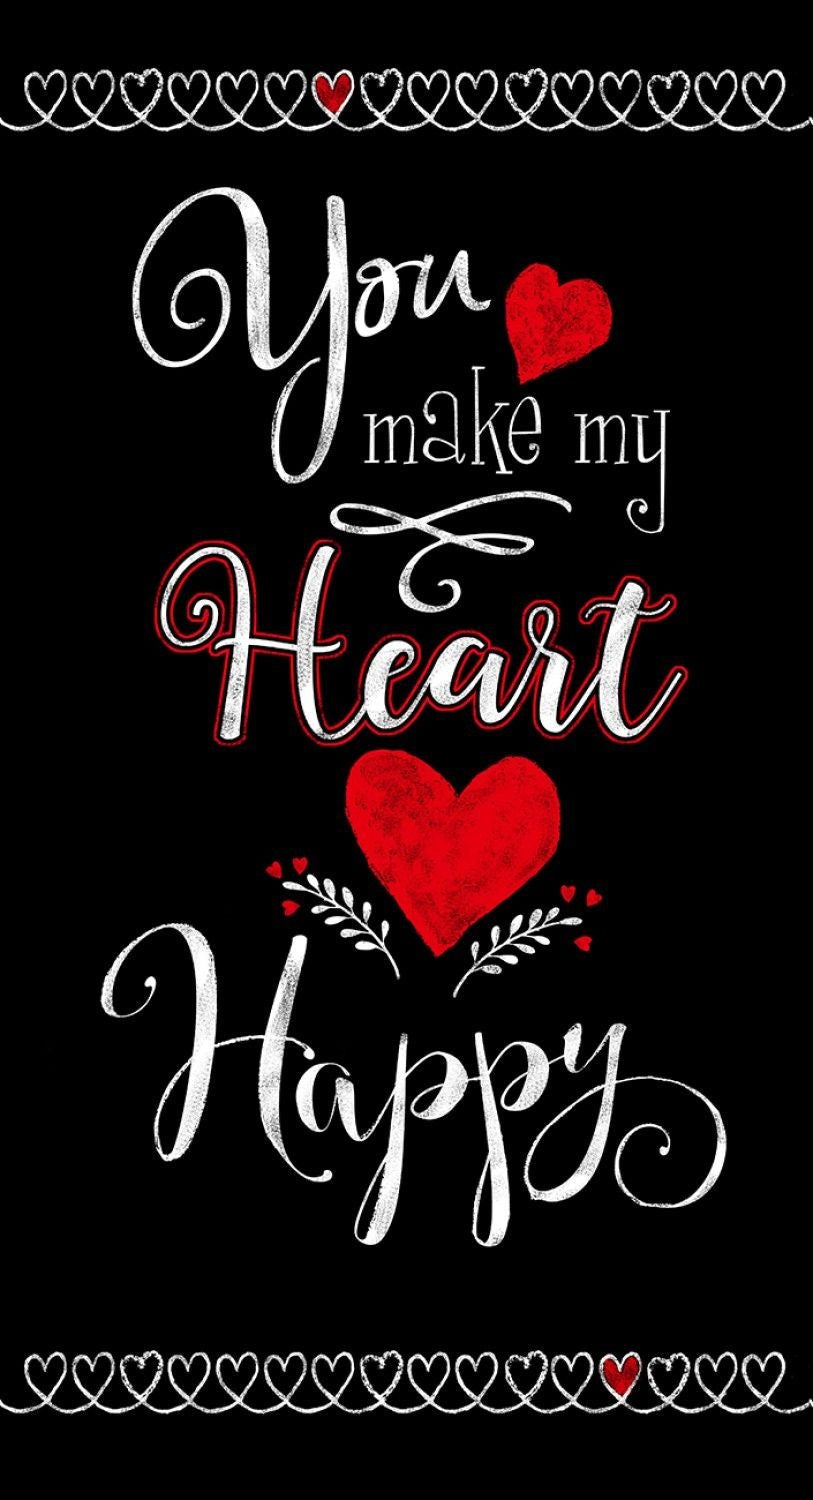 You Make My Heart Happy by Gail Cadden 24" Panel Black You Make My Heart Happy C7740-BLACK Cotton Woven Fabric